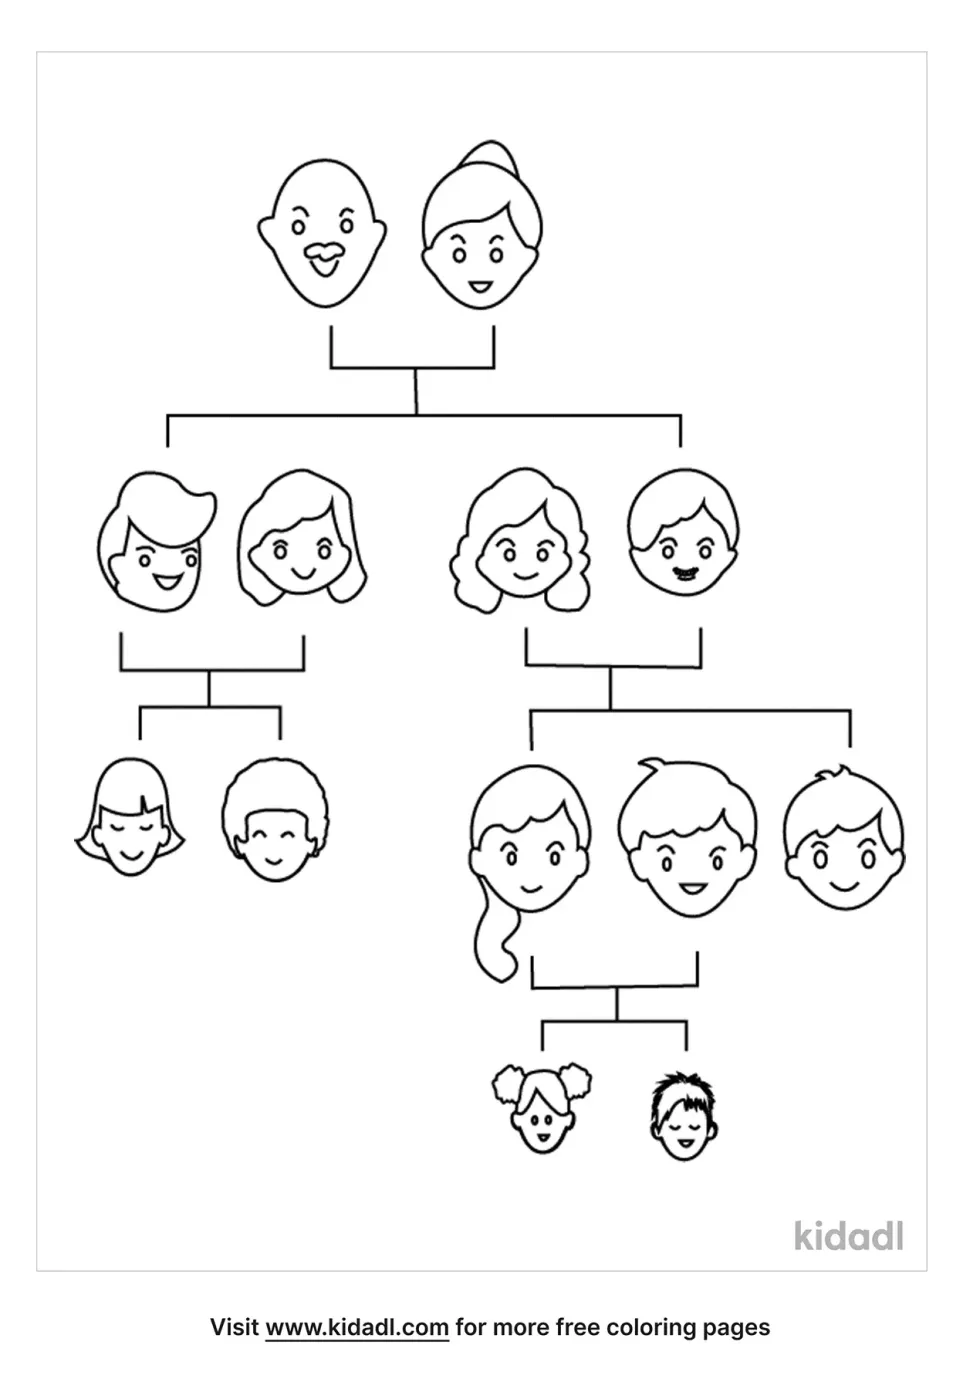 Family Tree With Faces